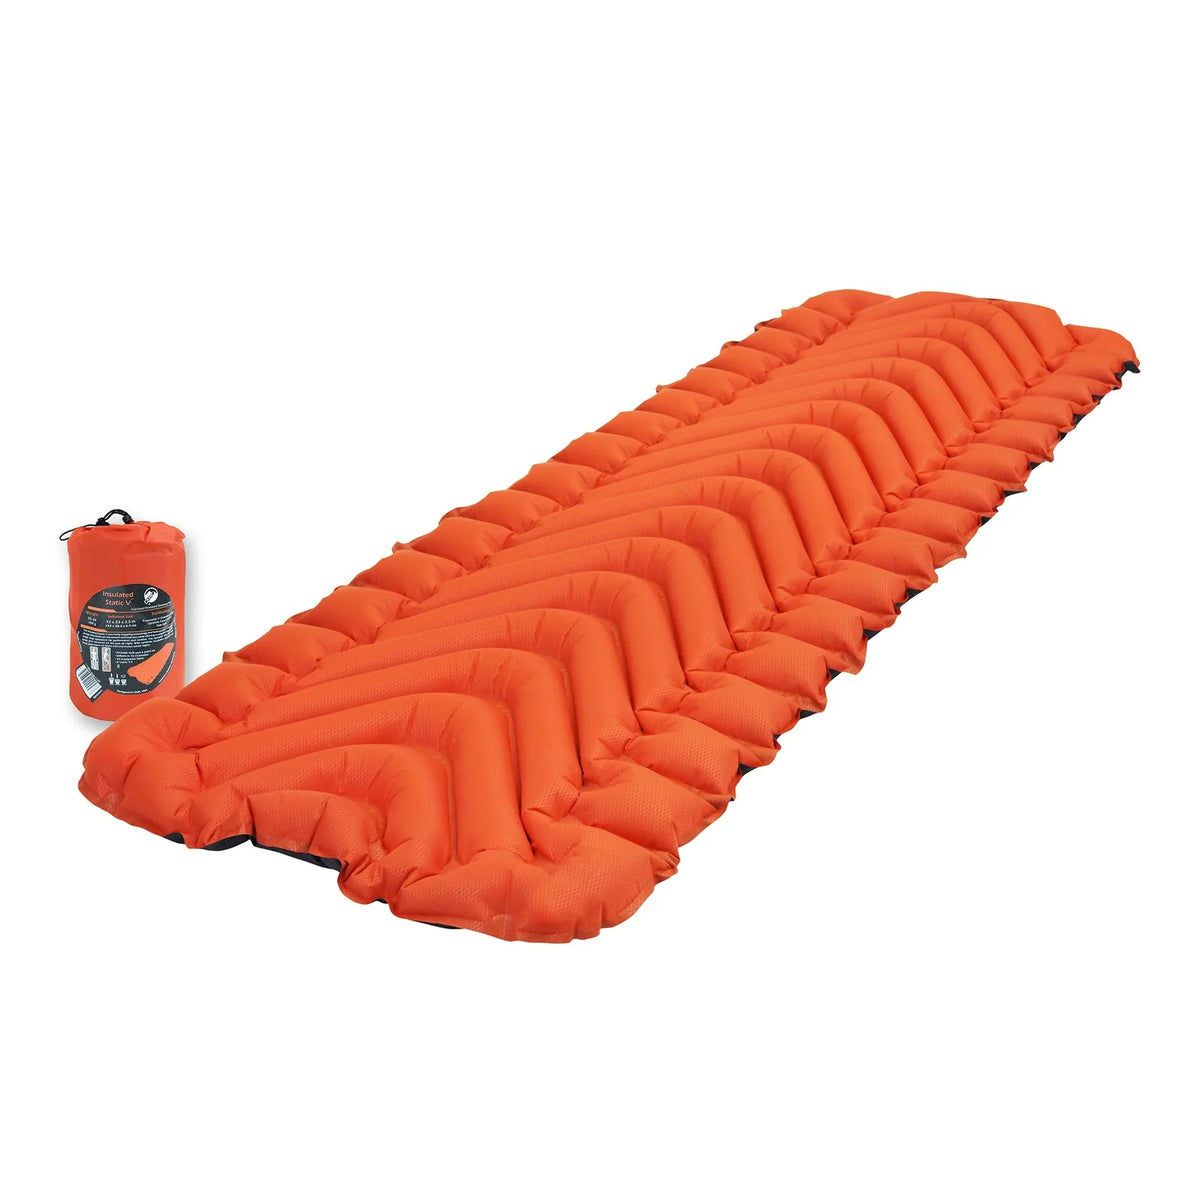 Klymit - Insulated Static V Sleeping Pad wit carry bag